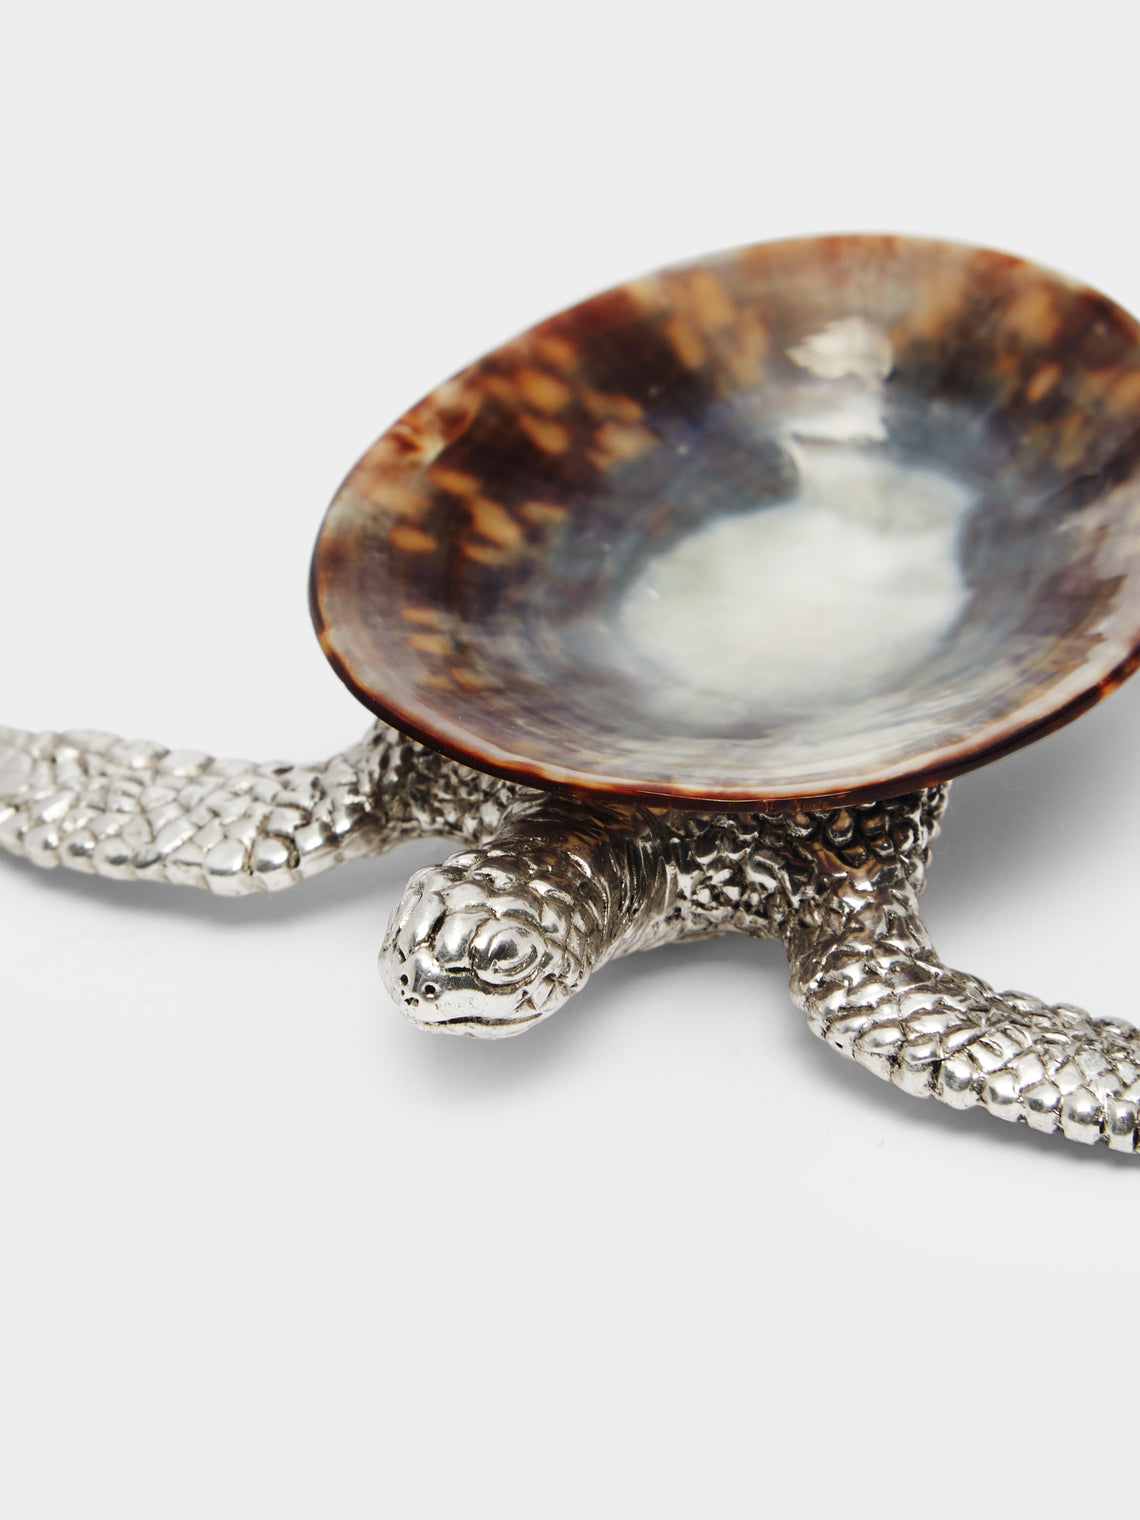 Objet Luxe - Silver-Plated and Shell Salt Dish with Mother-of-Pearl Spoon -  - ABASK